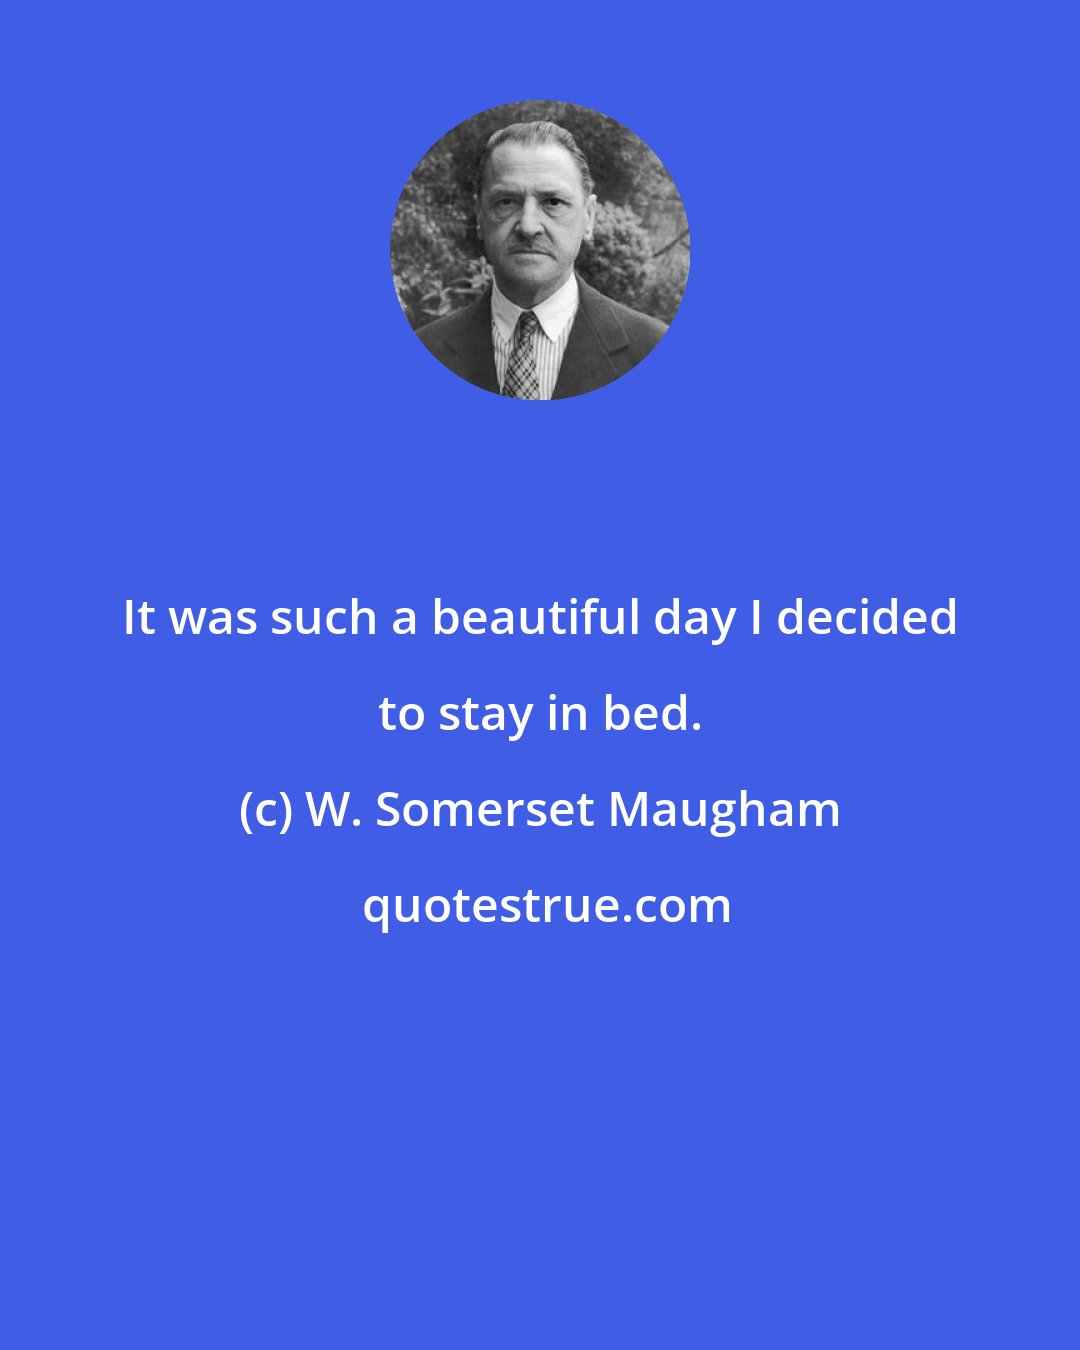 W. Somerset Maugham: It was such a beautiful day I decided to stay in bed.